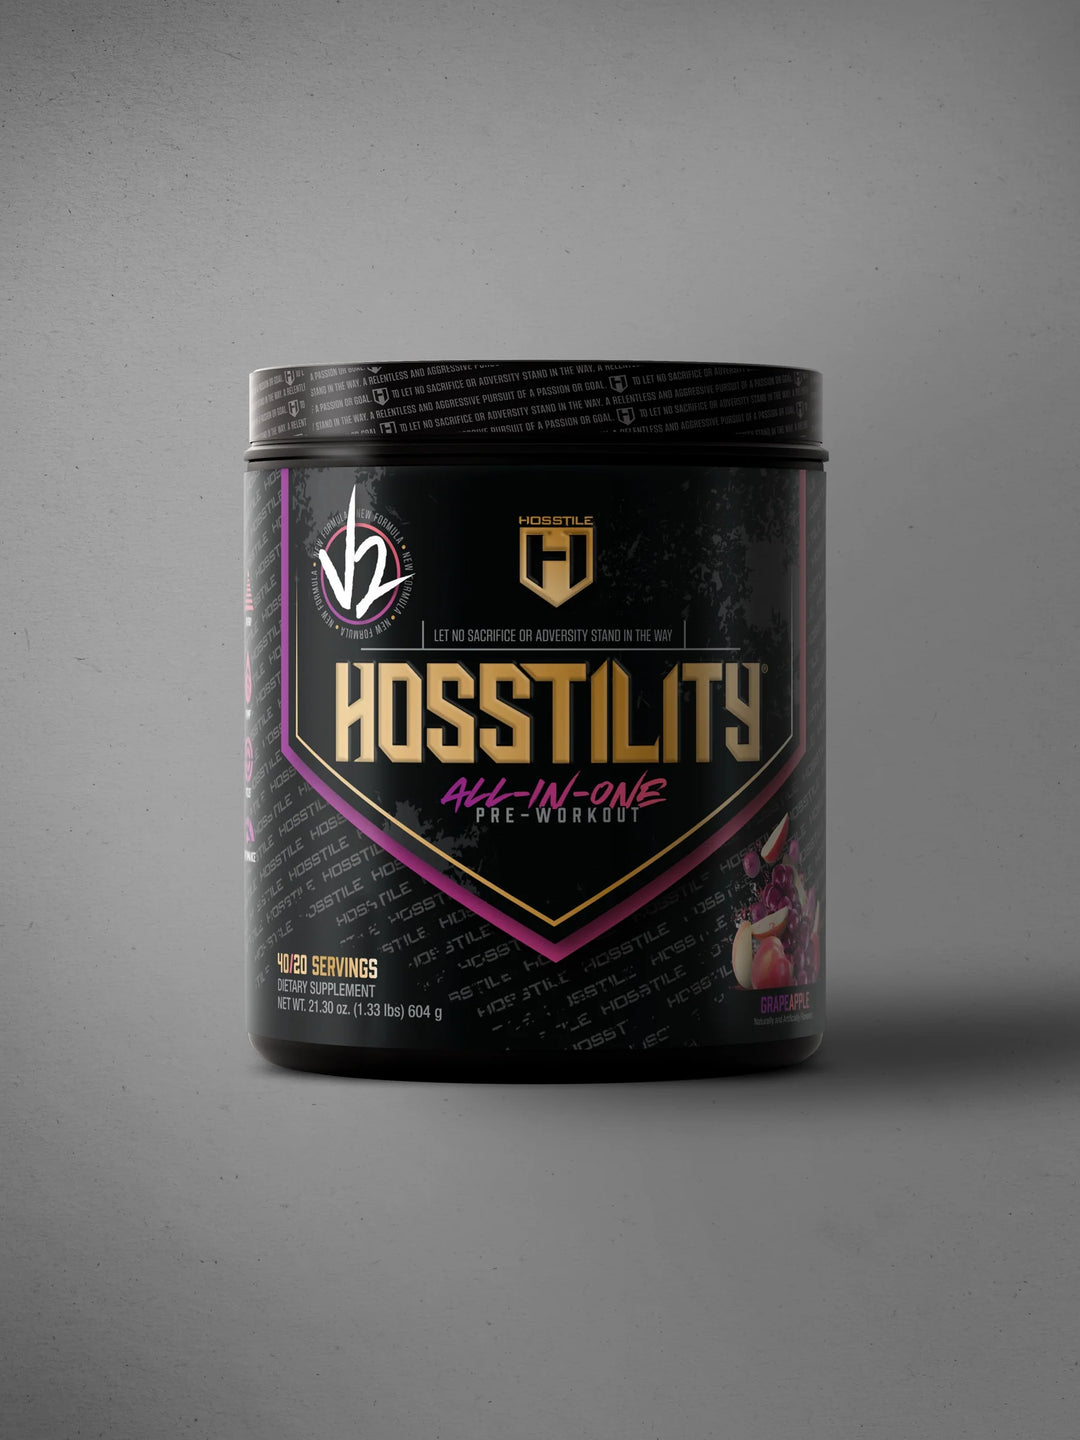 HOSSTILITY V2 ALL-IN-ONE PRE-WORKOUT